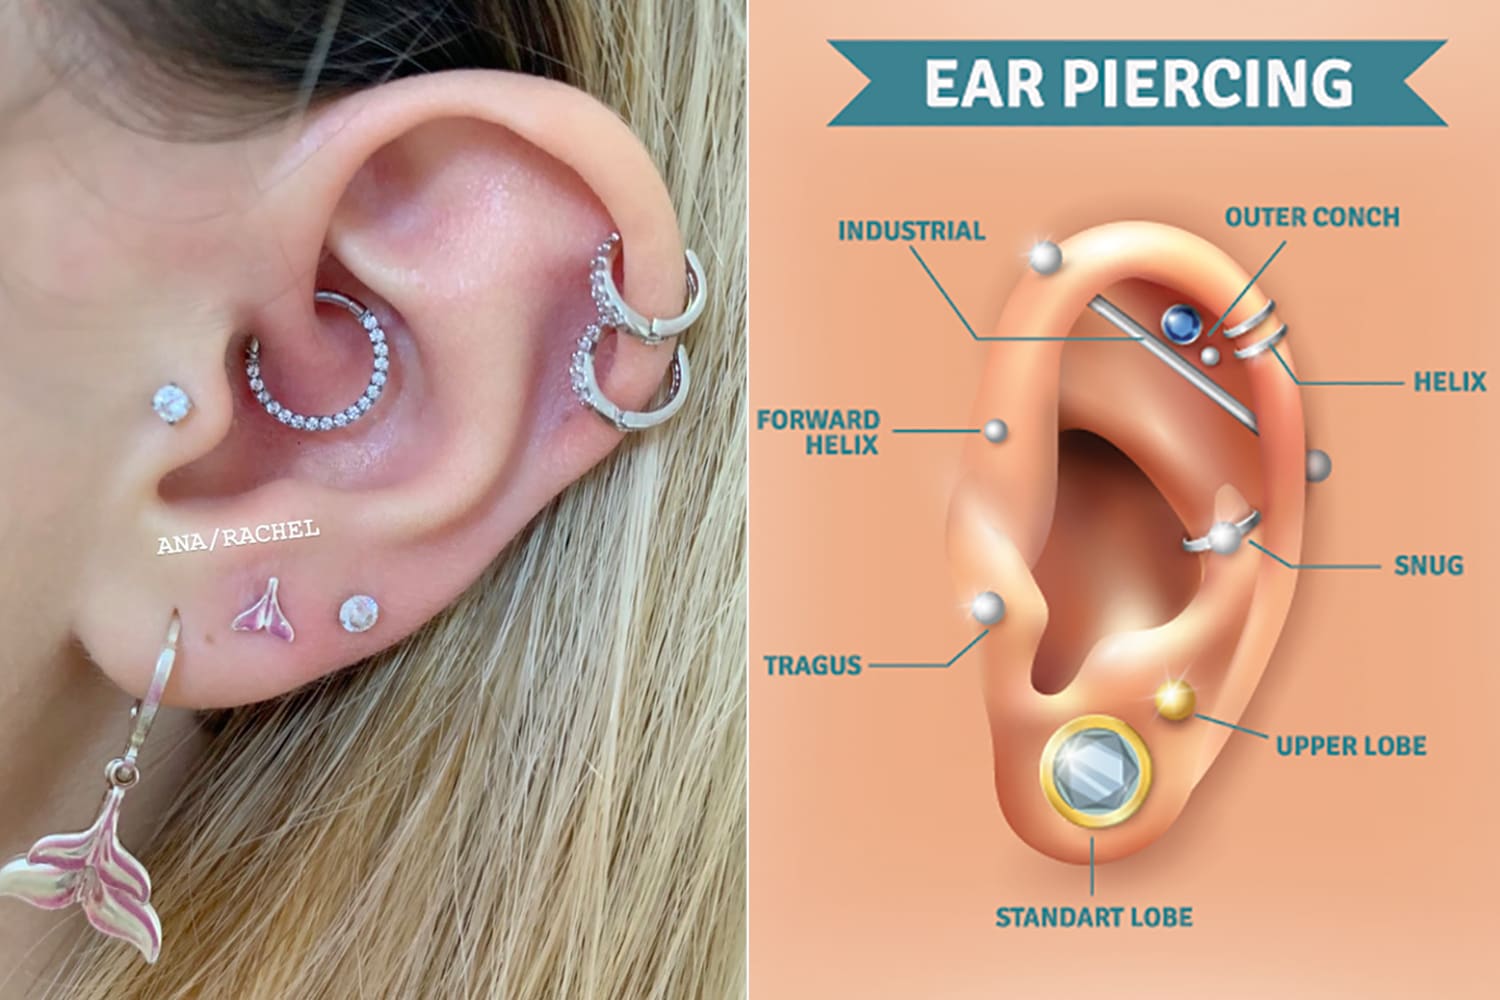 What Is a Helix Piercing? Here's Your 